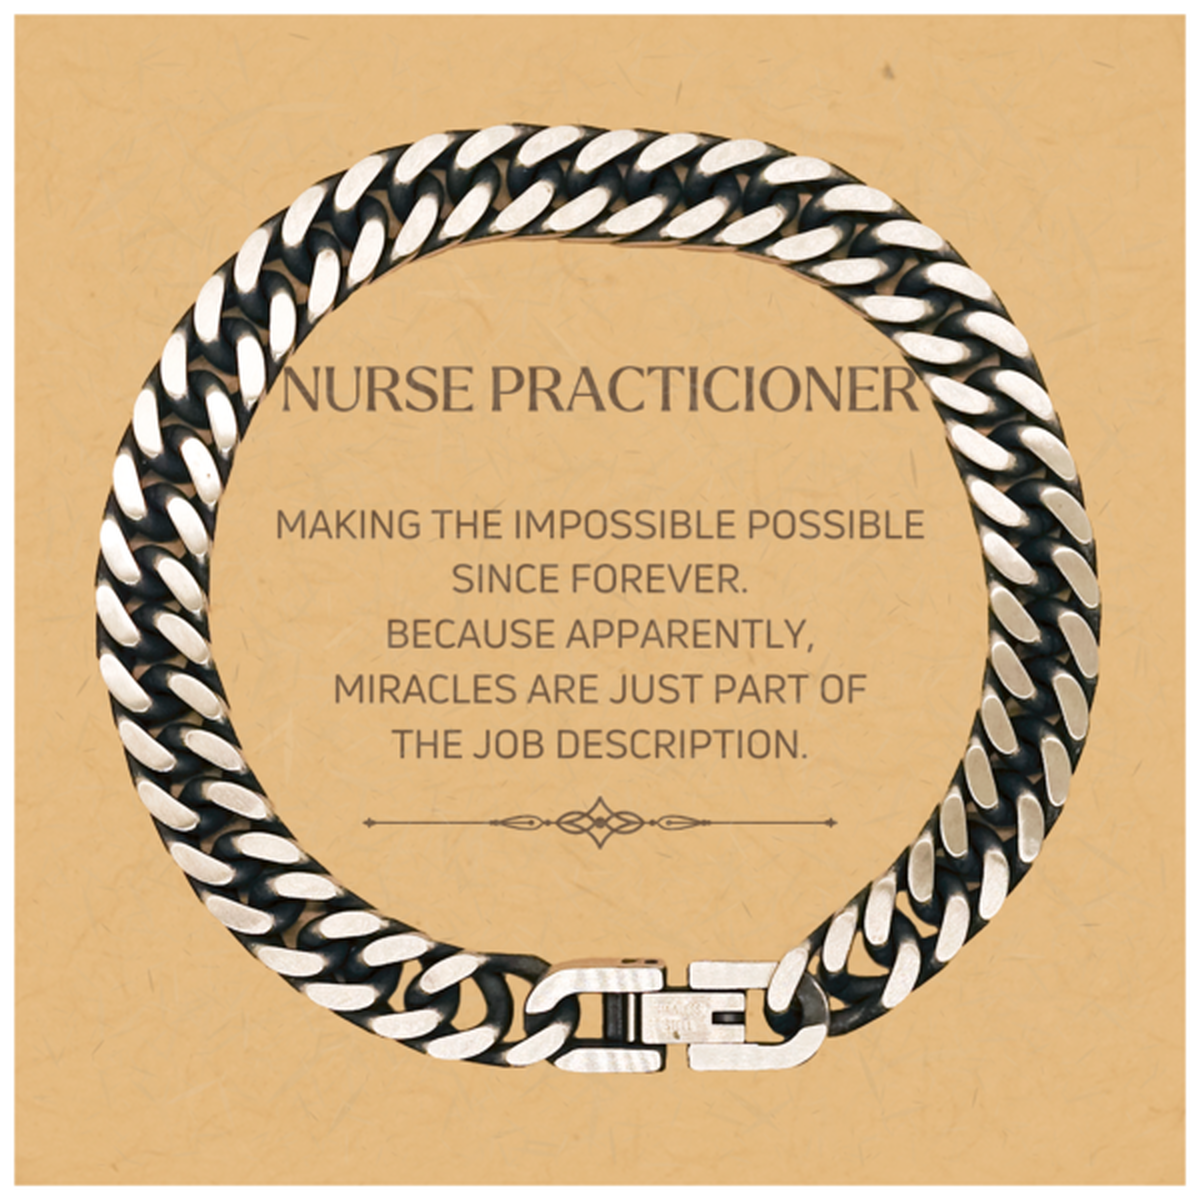 Funny Nurse Practicioner Gifts, Miracles are just part of the job description, Inspirational Birthday Christmas Cuban Link Chain Bracelet For Nurse Practicioner, Men, Women, Coworkers, Friends, Boss